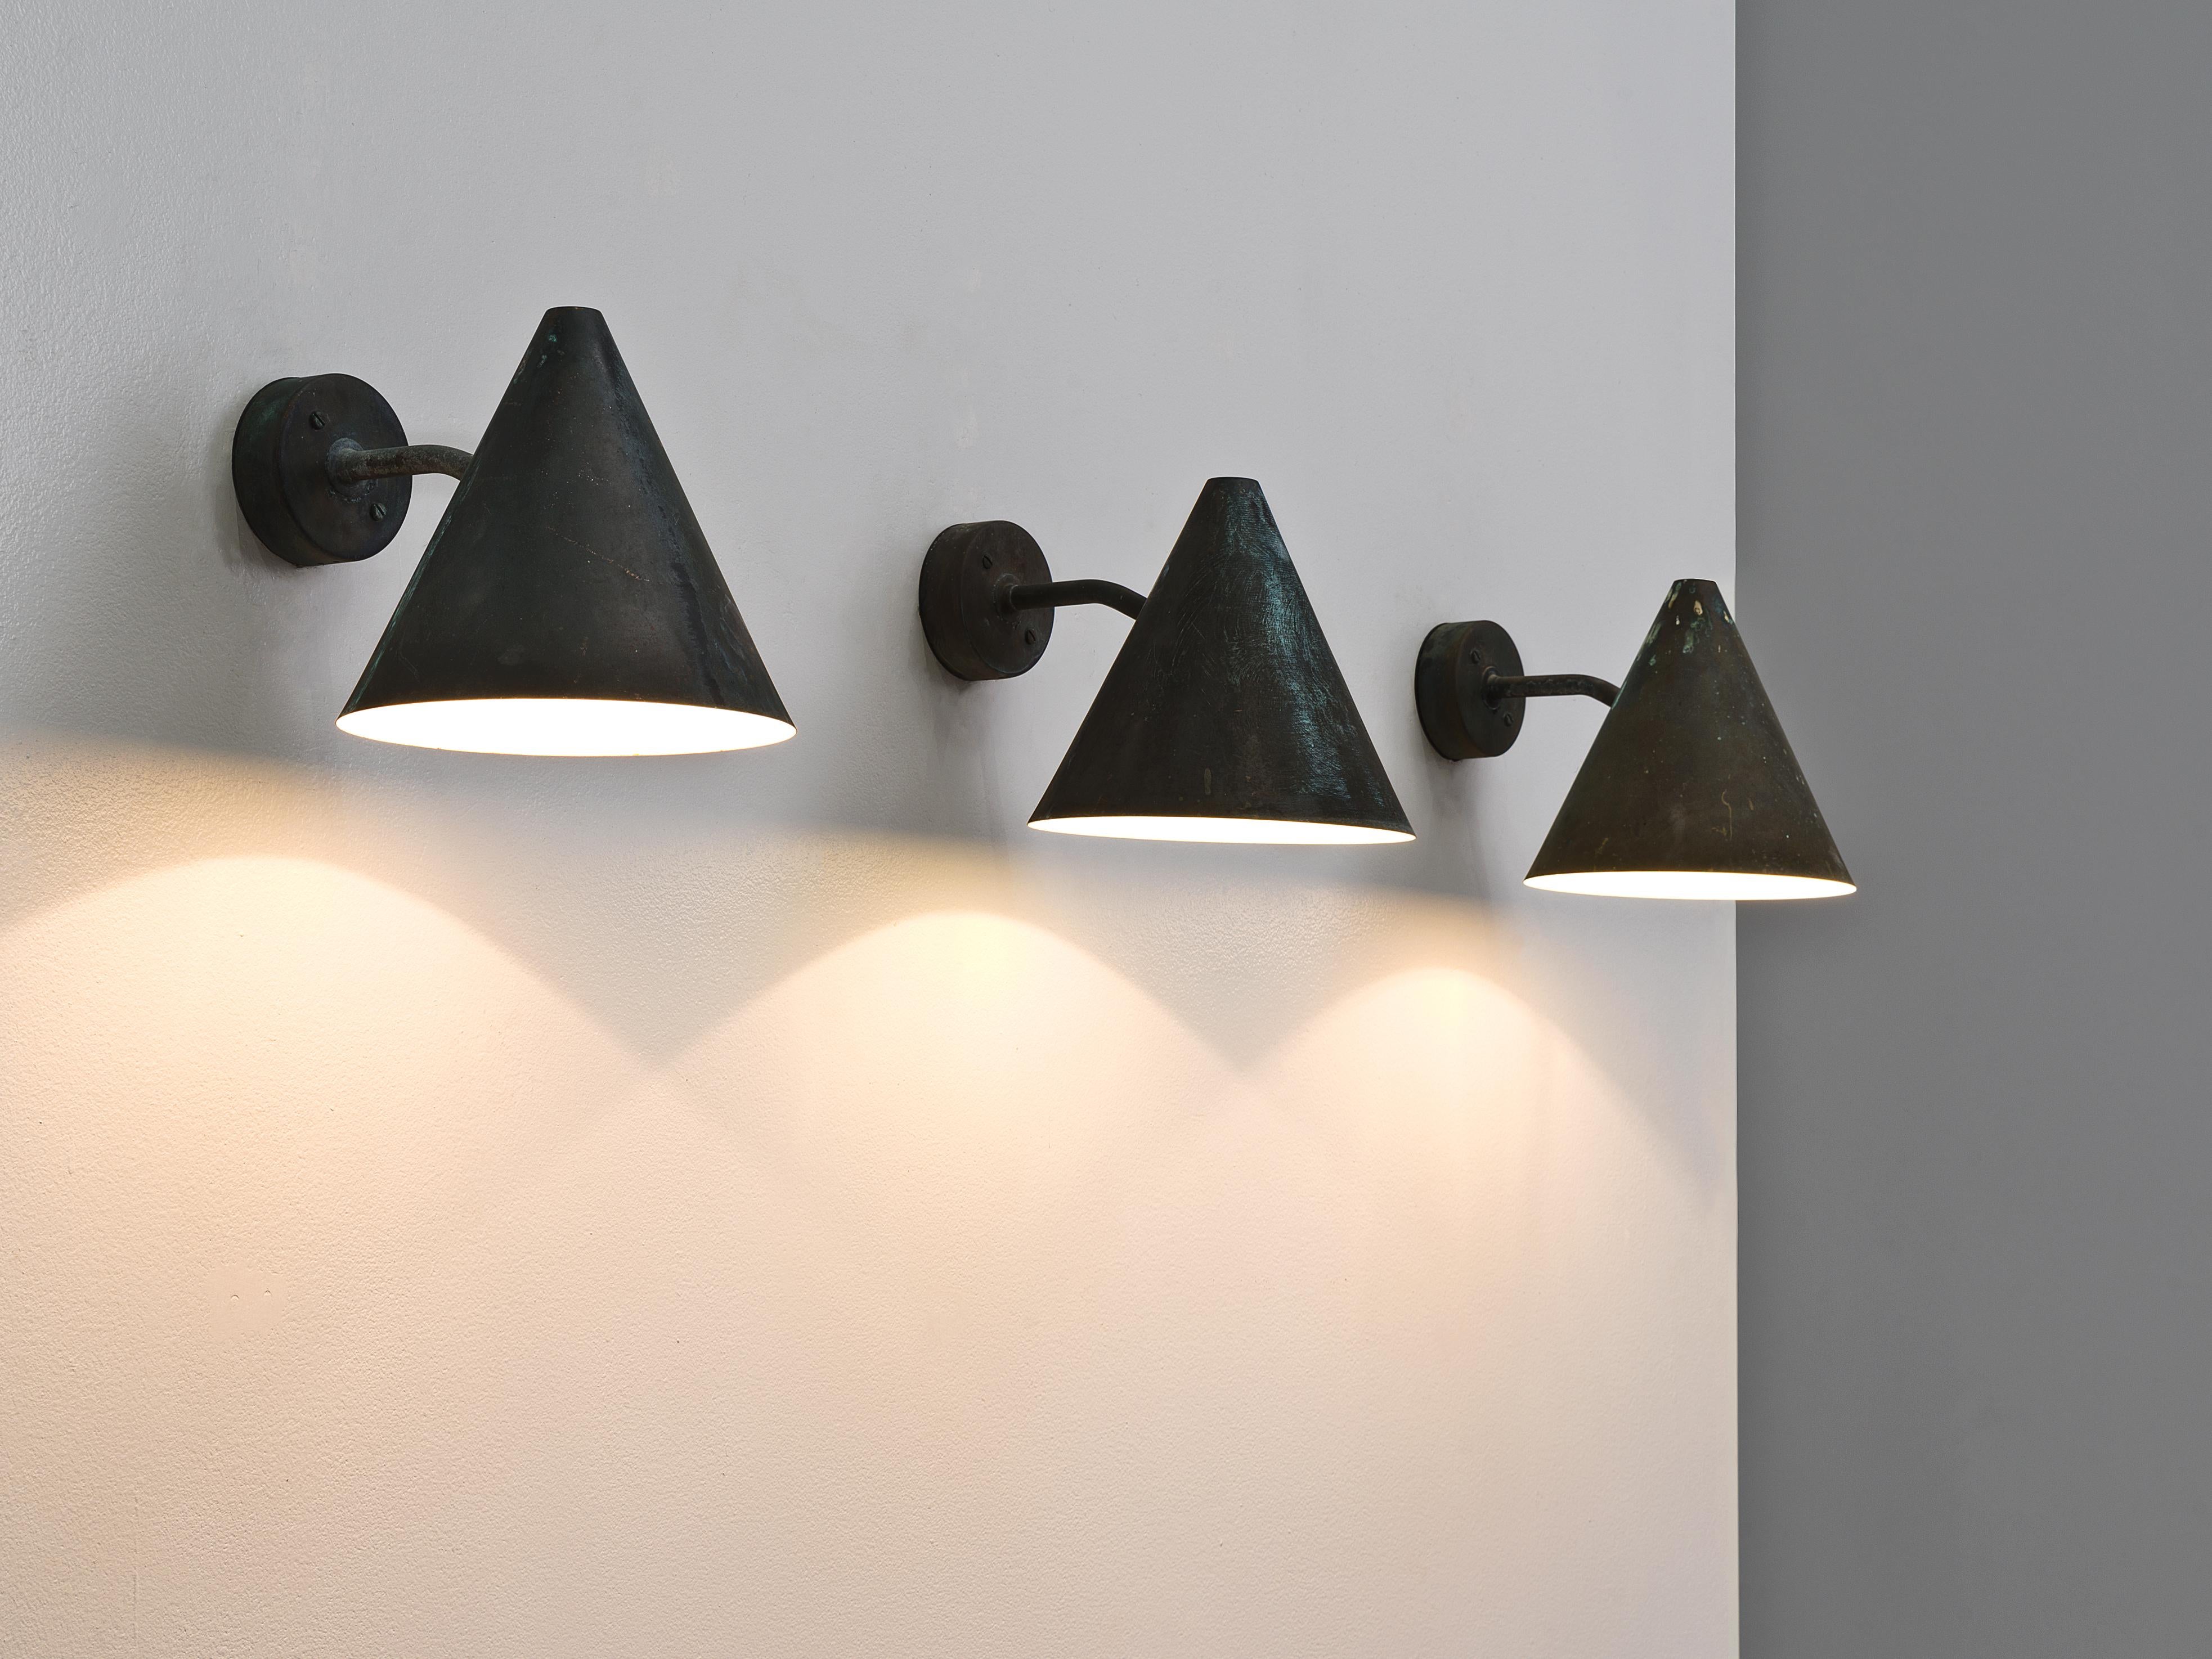 Hans-Agne Jakobsson for AB Markaryd, wall lights ‘Tratten’, copper, Sweden, 1950s

Set of cone-shaped wall lights designed by Hans-Agne Jakobsson for AB Markaryd, in beautifully patinated copper with an off-white inside. The light that this model